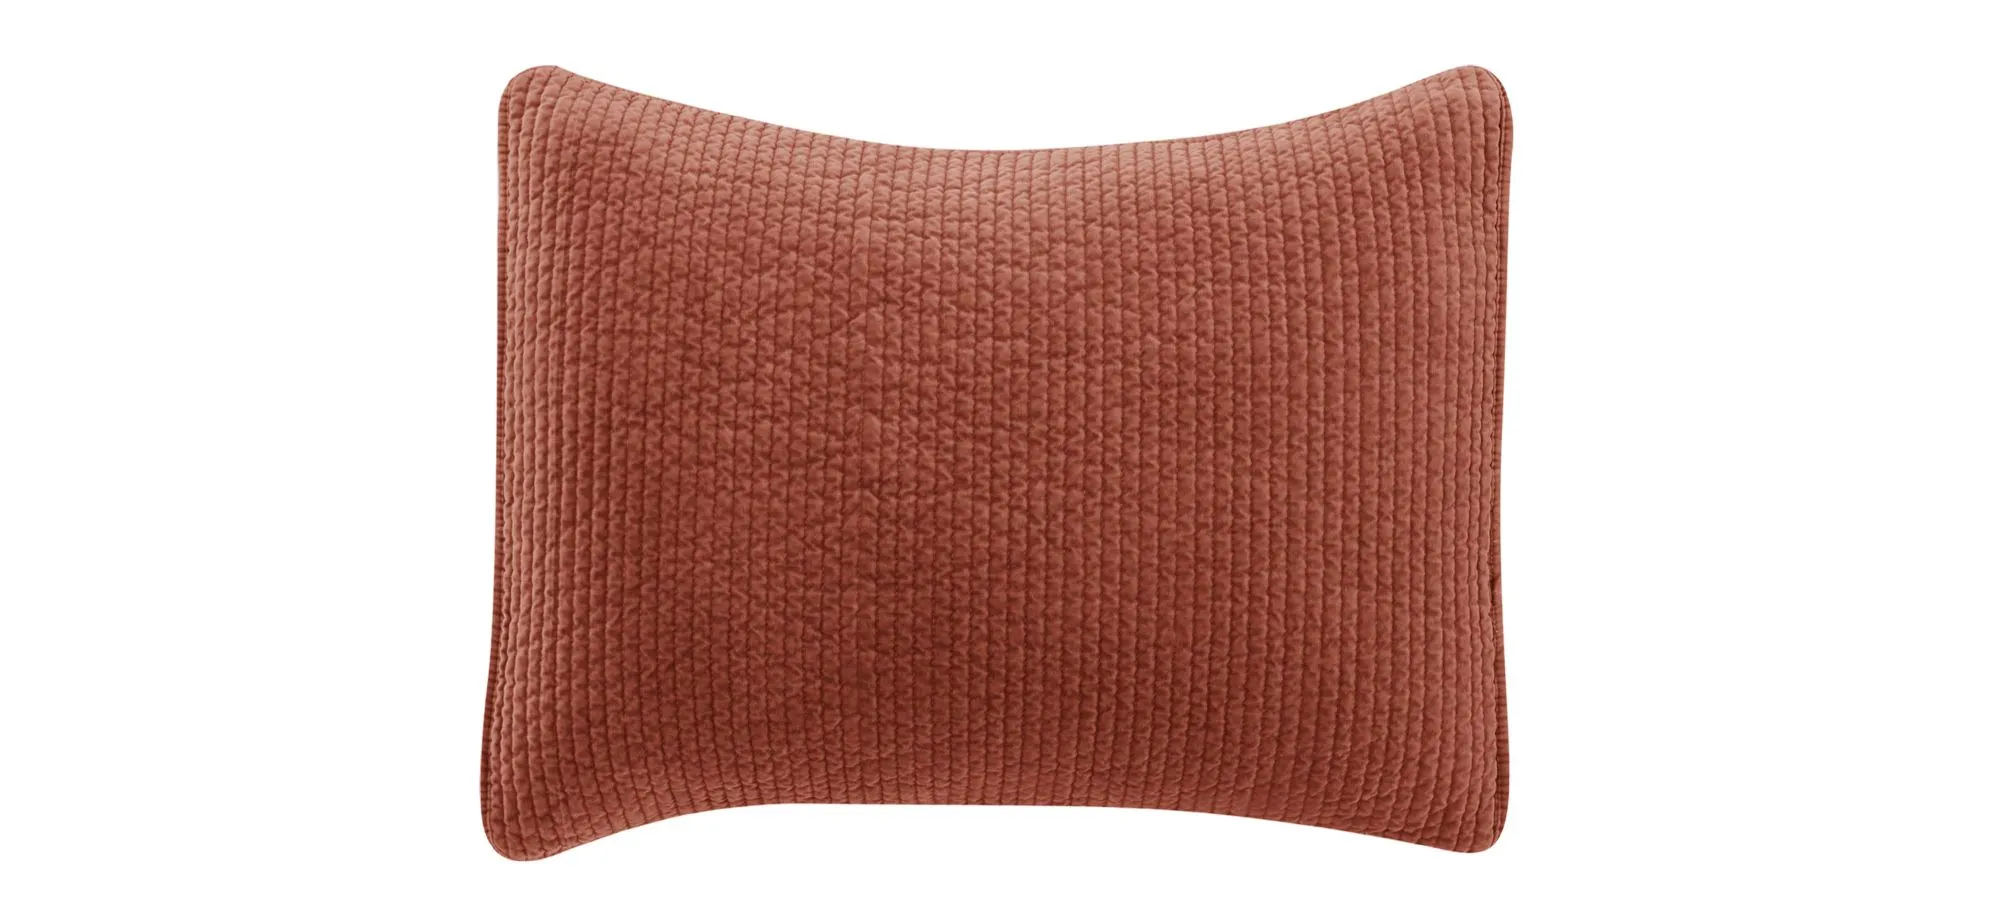 Stonewashed Cotton Velvet Quilted Pillow Sham in Salmon by HiEnd Accents